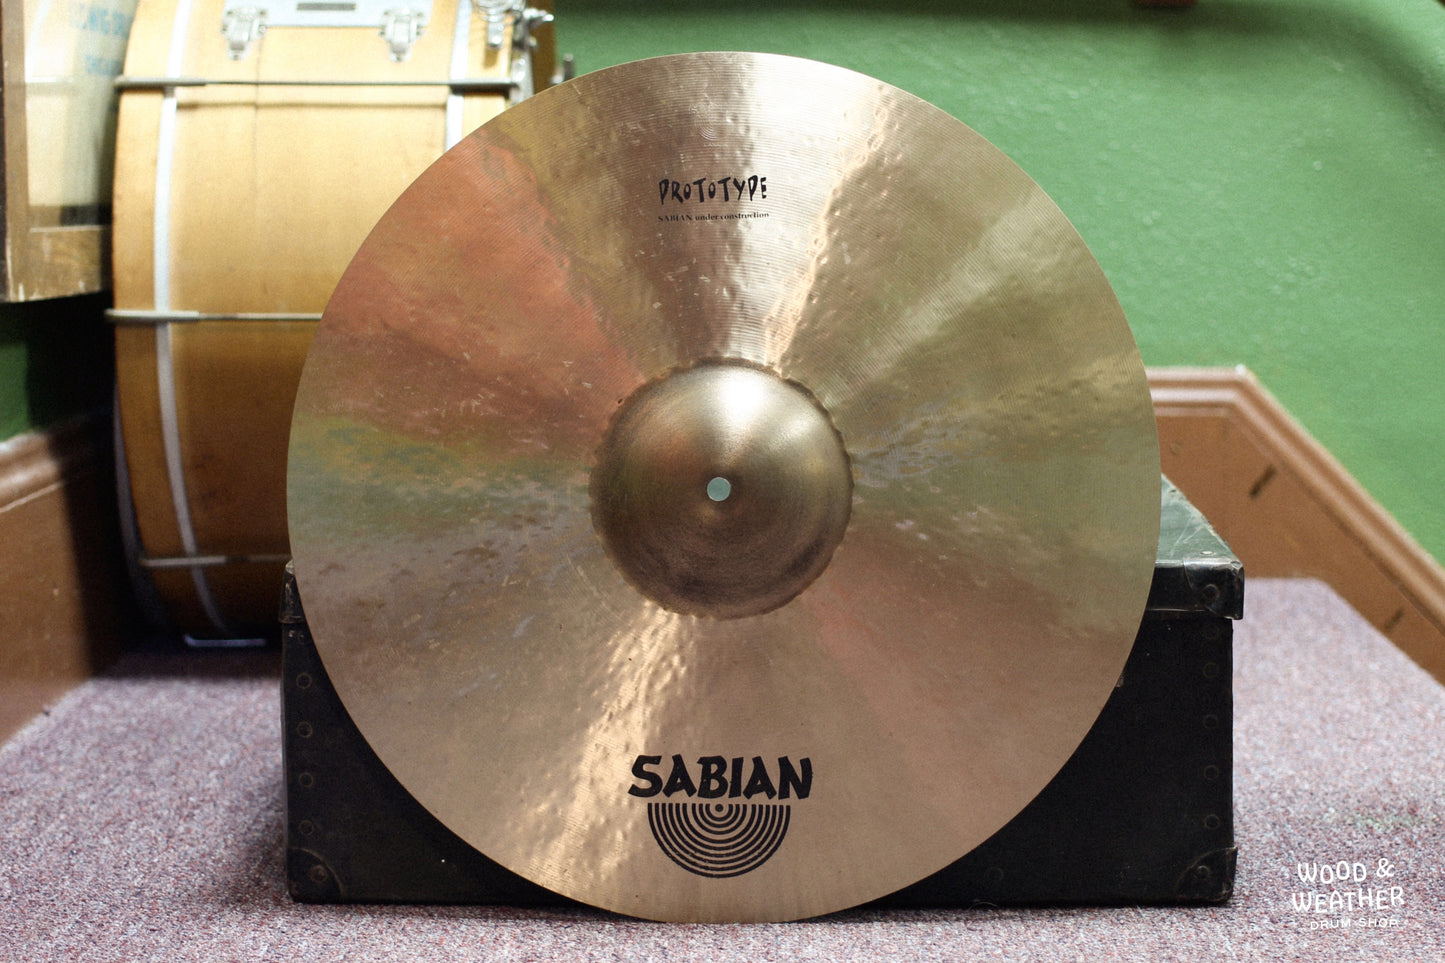 Used Sabian 20" Prototype HHX Raw Bell Dry Ride Cymbal 1785g